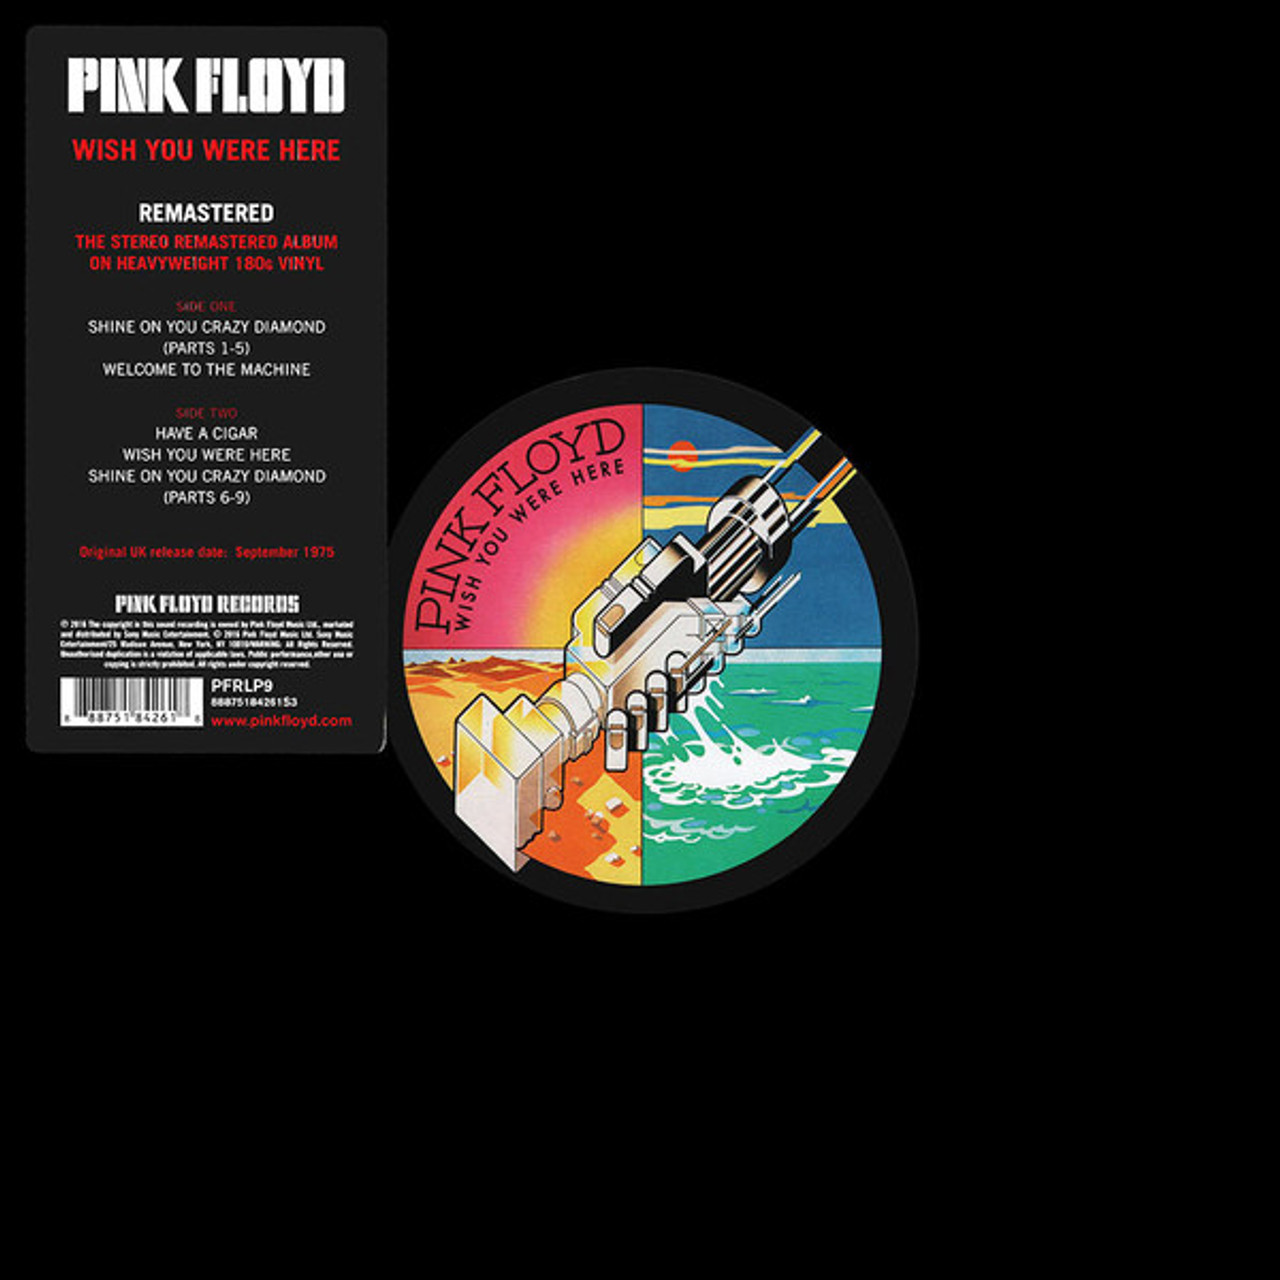 Wish You Were Here (2011 Remastered Version) - Album by Pink Floyd